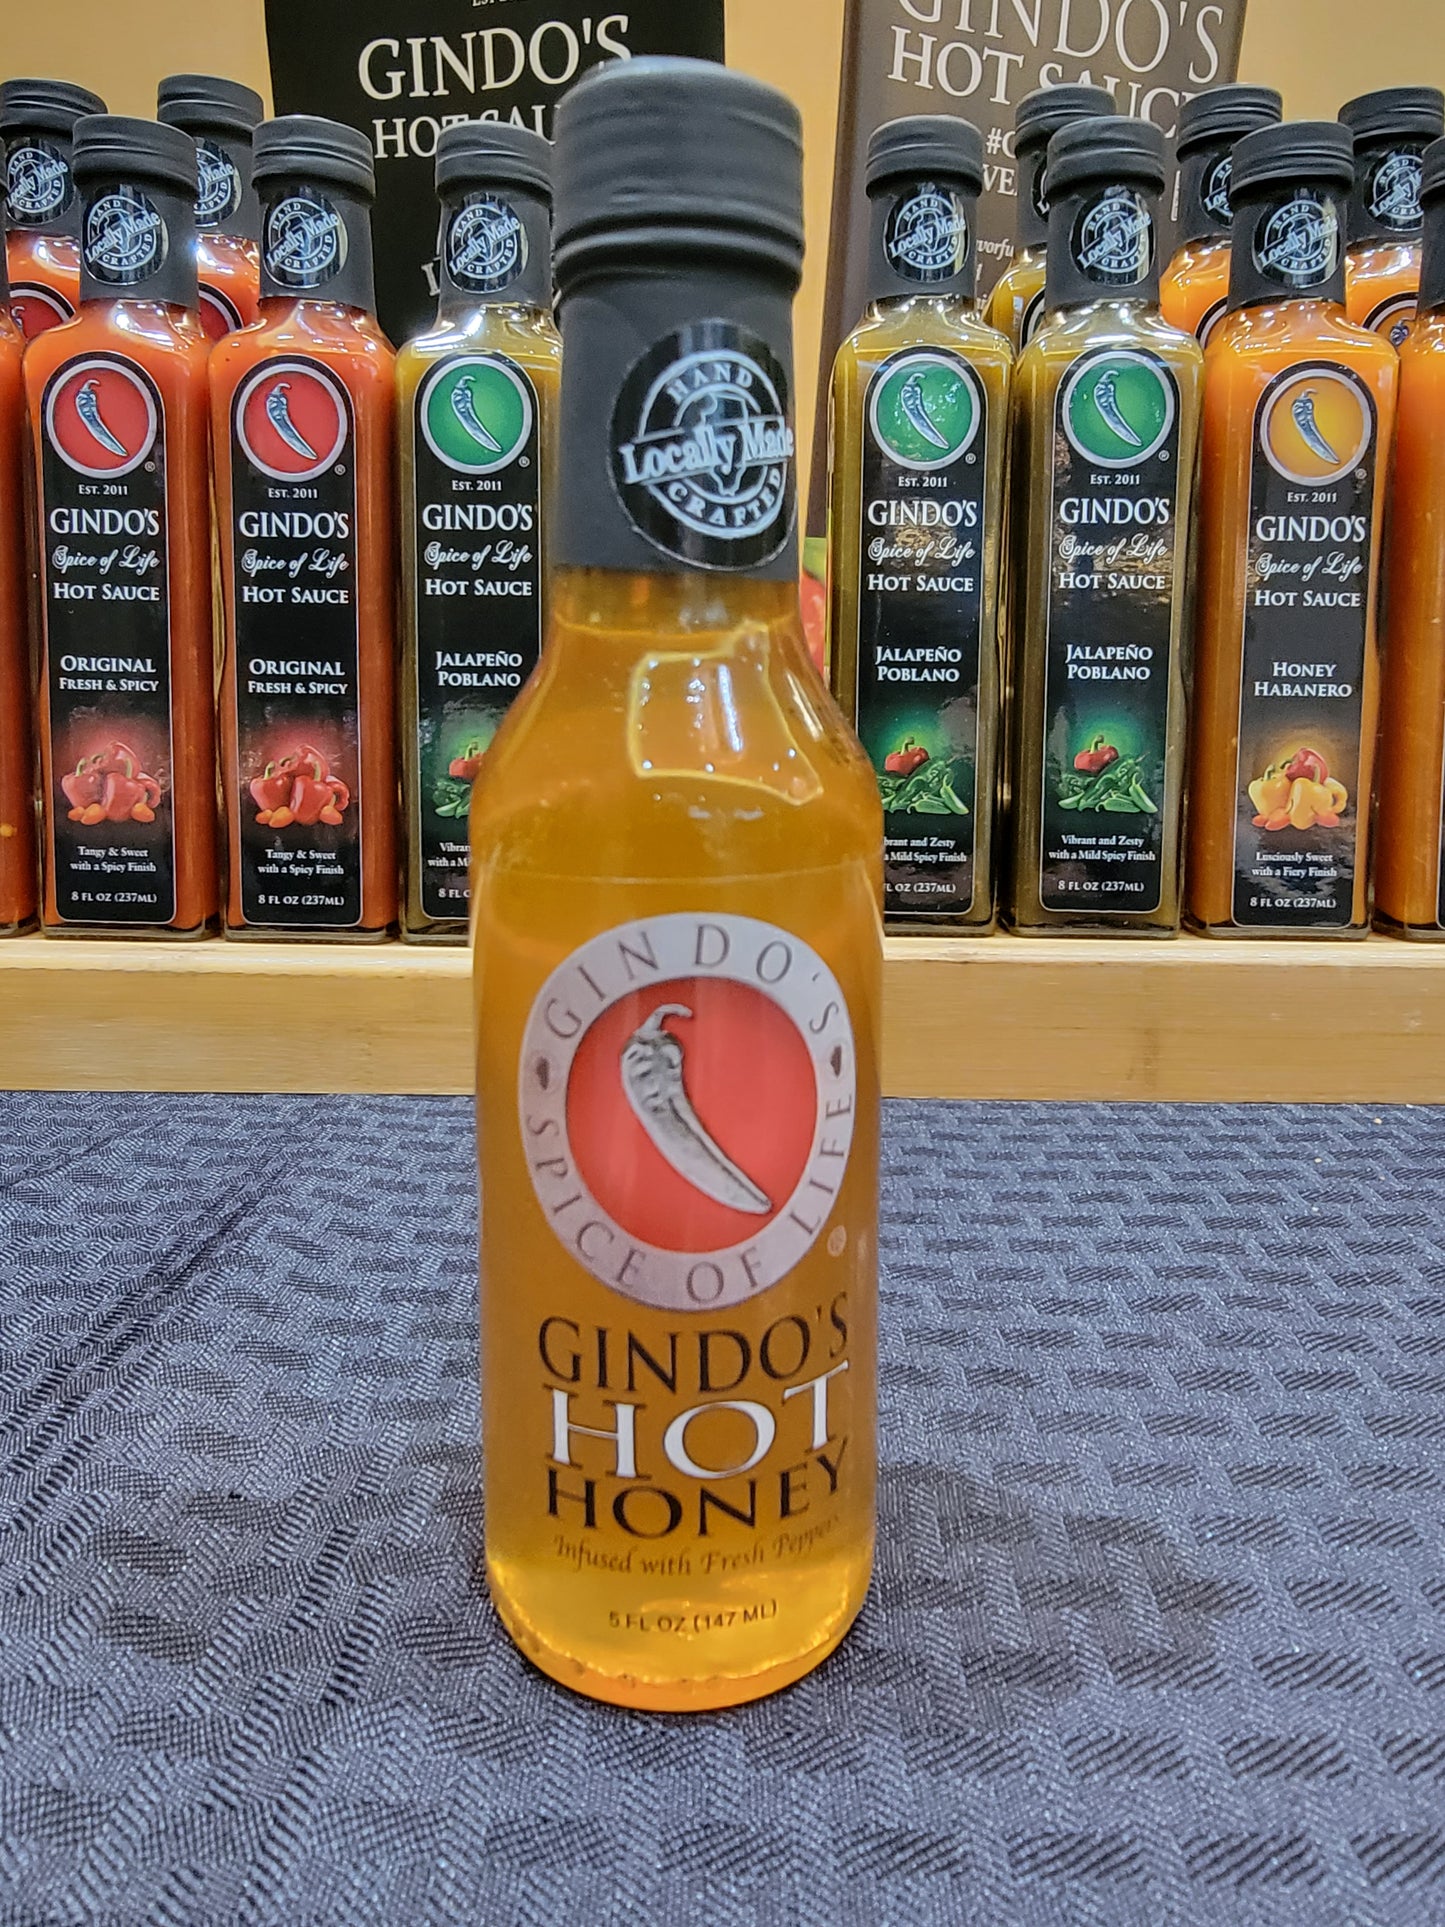 Gindos "Spice of Life" Hot Sauce